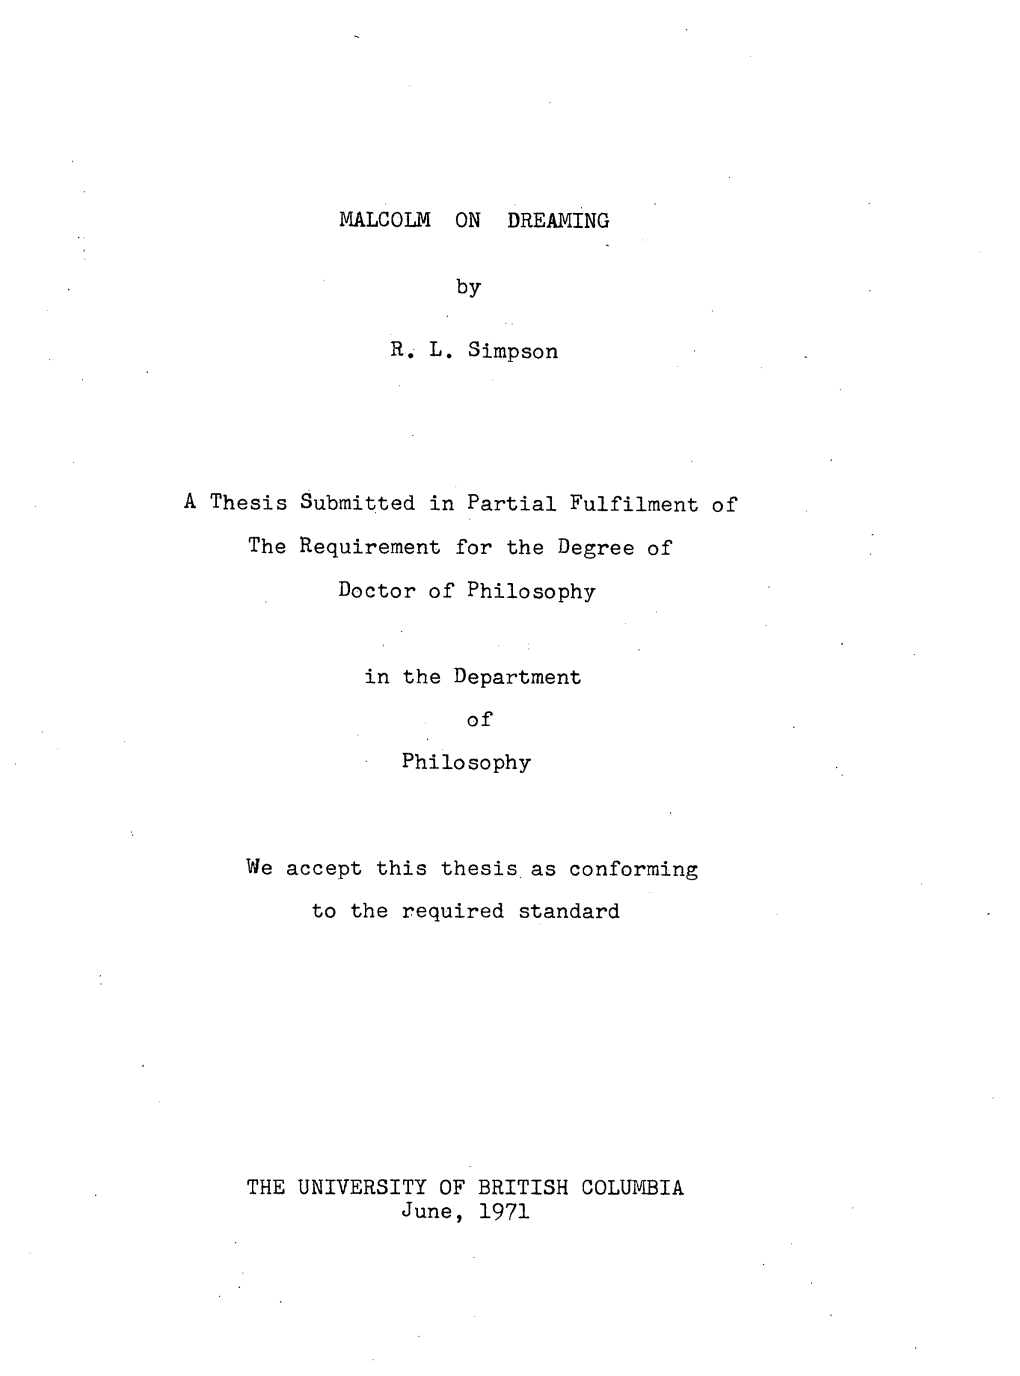 MALCOLM on DREAMING by R. L. Simpson a Thesis Submitted In